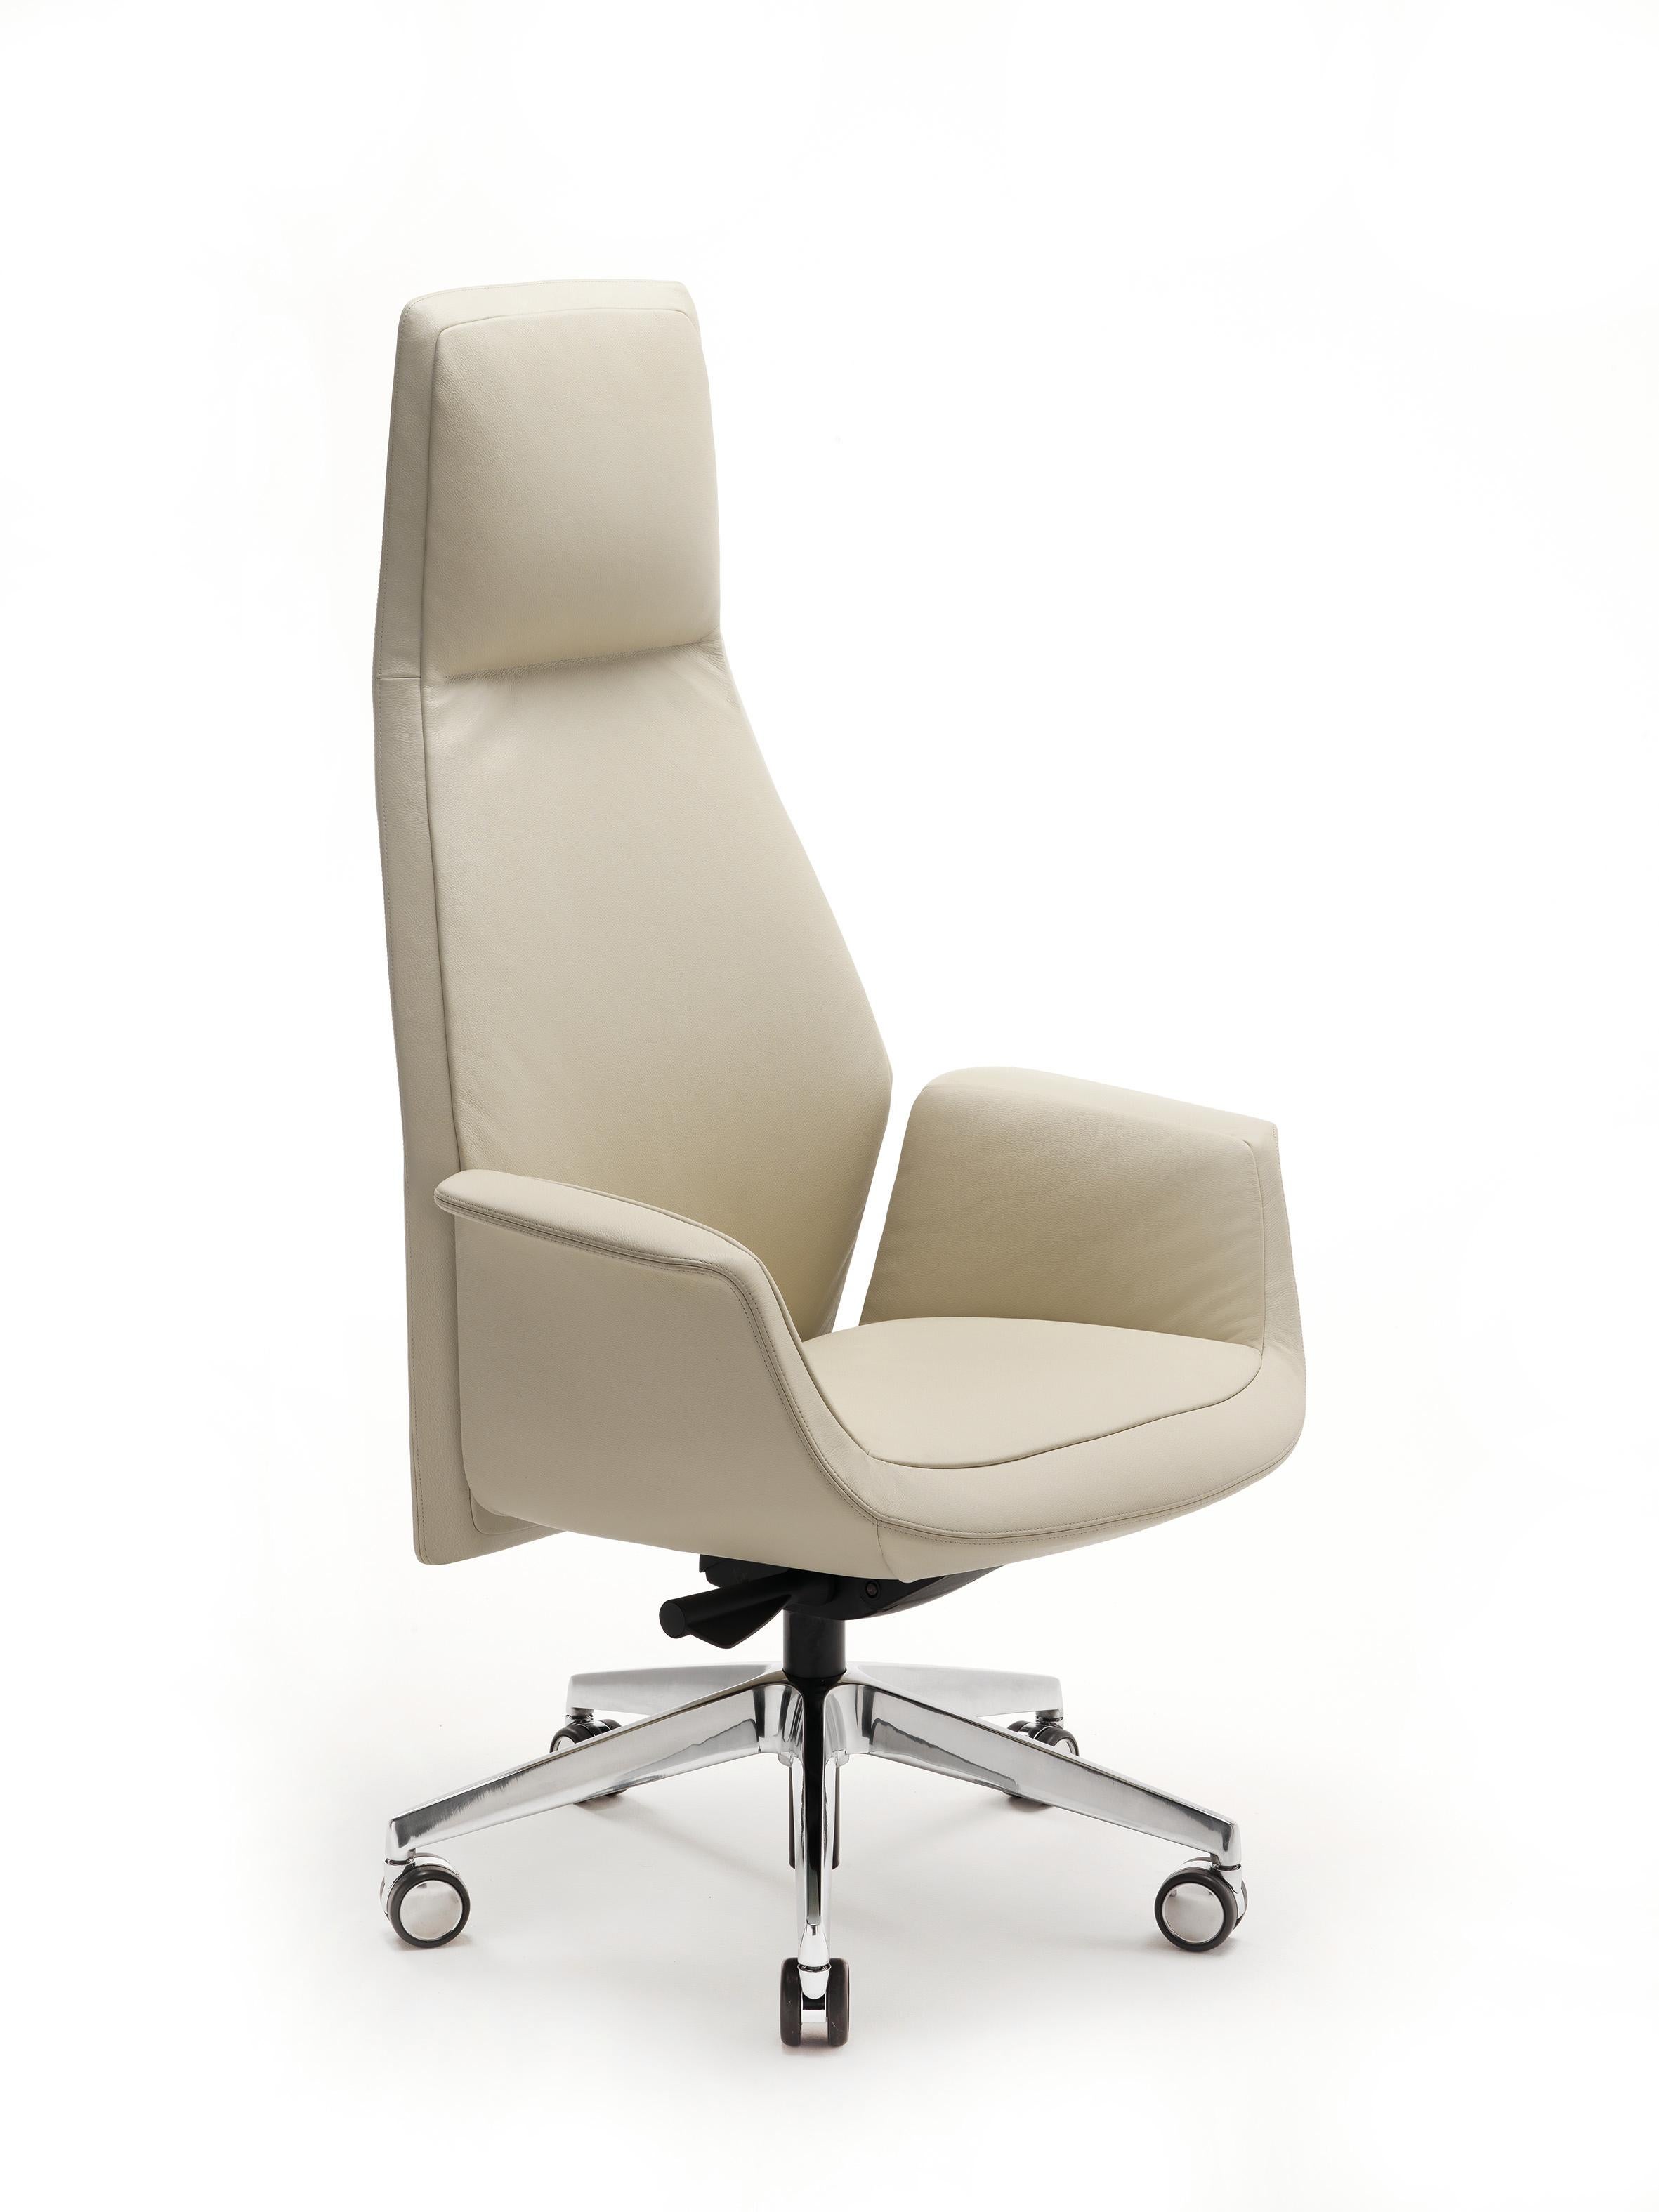 Competent, elegant, timeless… the DownTown chair is for demanding decision-makers looking for comfort and sophistication. A sleek technical seat handcrafted by the Poltrona Frau craftsmen, a guarantee of its quality. Much more than a stunning